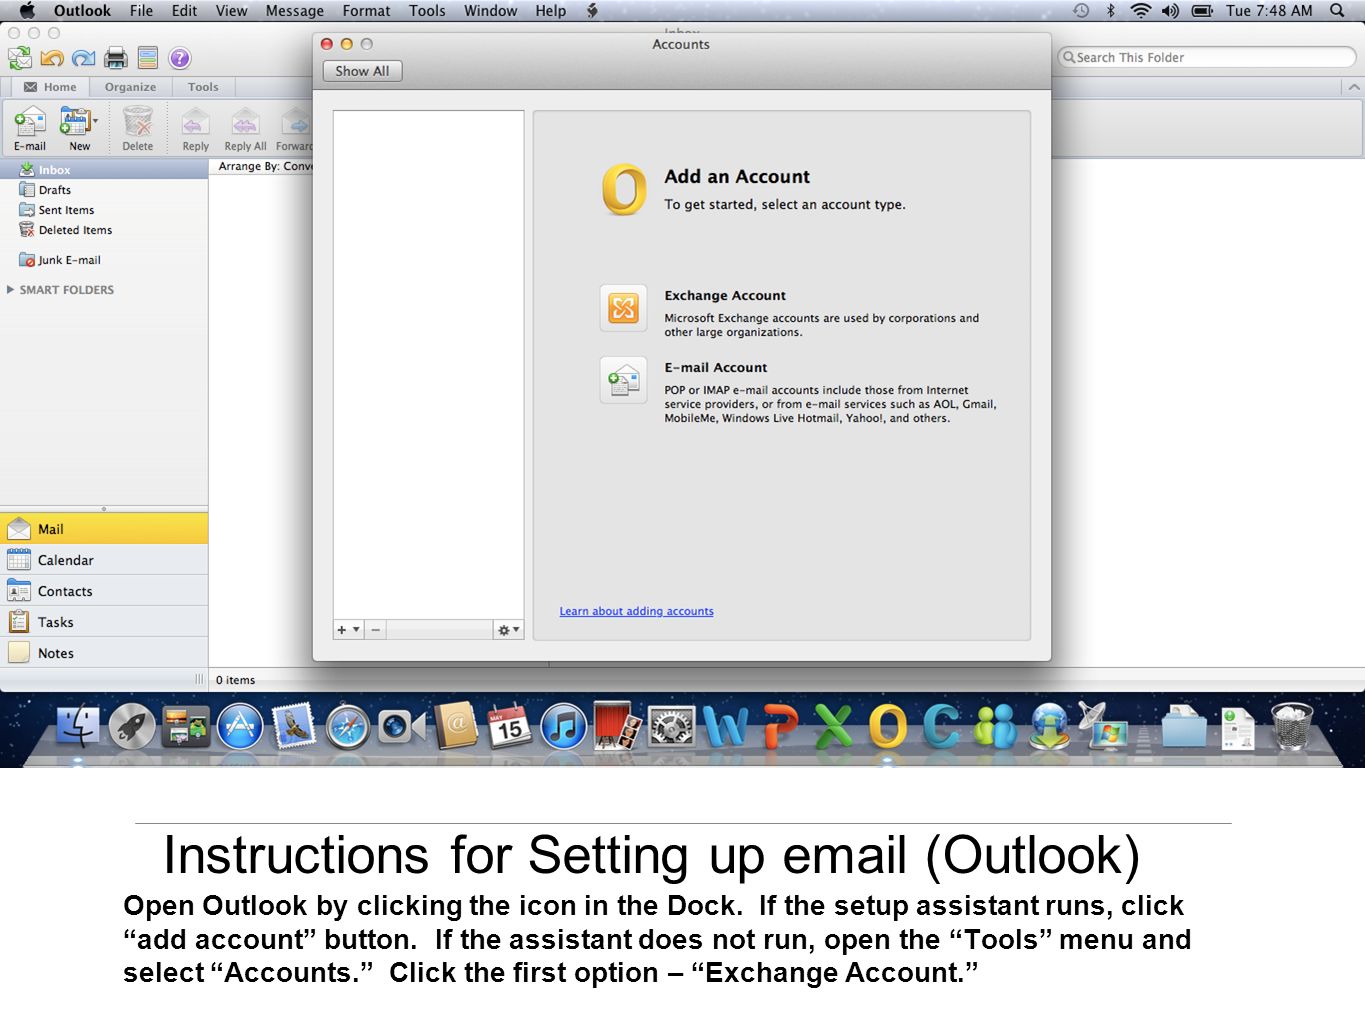 Open Outlook by clicking the icon in the Dock.